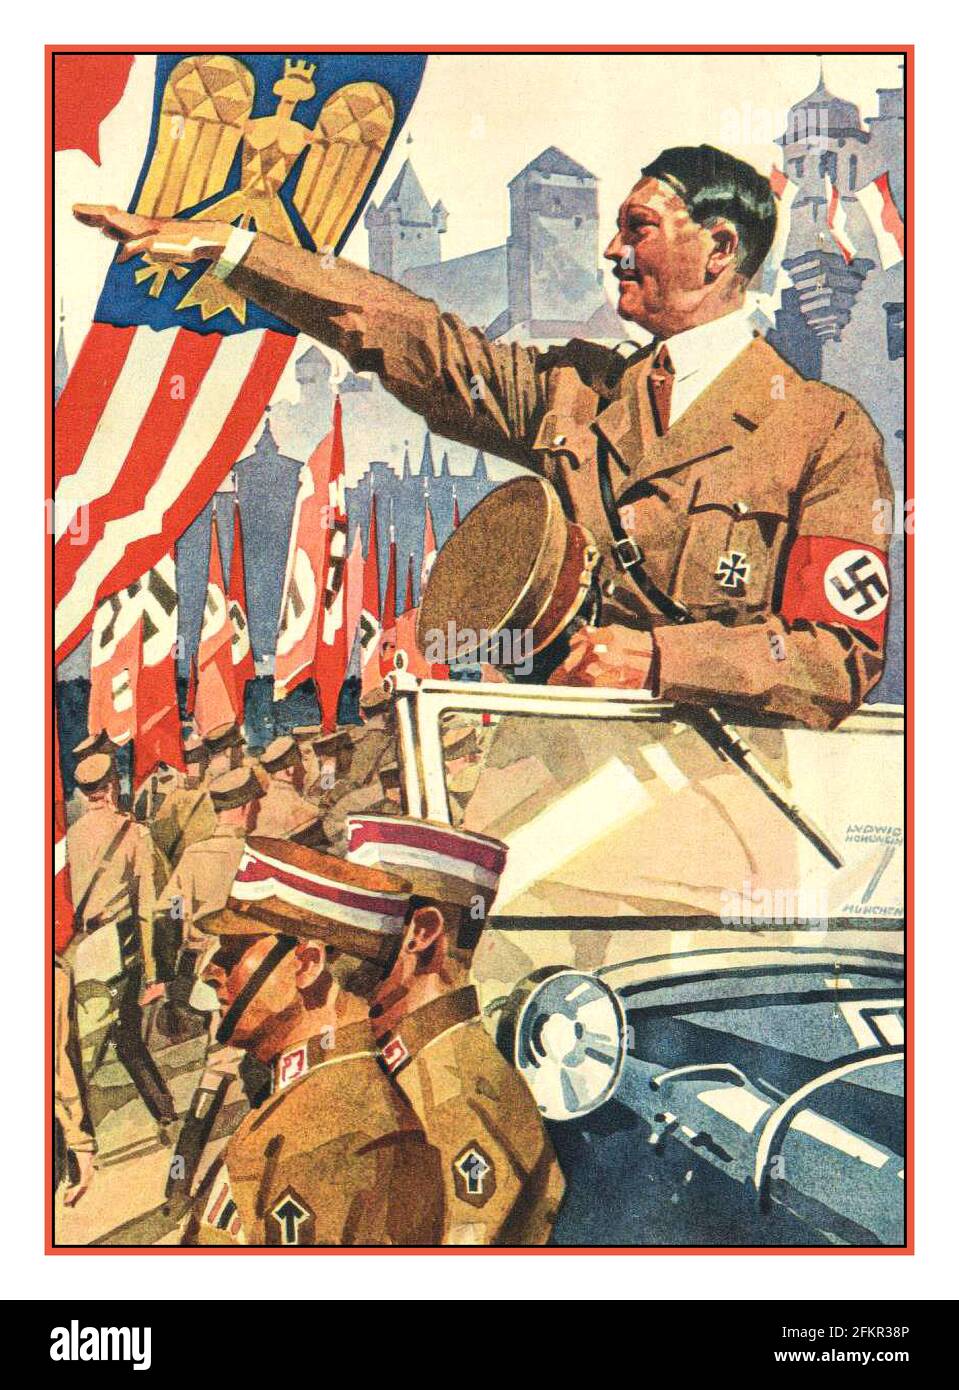 1930's Adolf Hitler in SA paramilitary uniform. Poster Card Illustration of Hitler wearing Swastika armband Reichsparteitag Nuremberg Rally with the Sturmabteilung Brown Shirts 1937 Ludwig Hohlwein artist Stock Photo